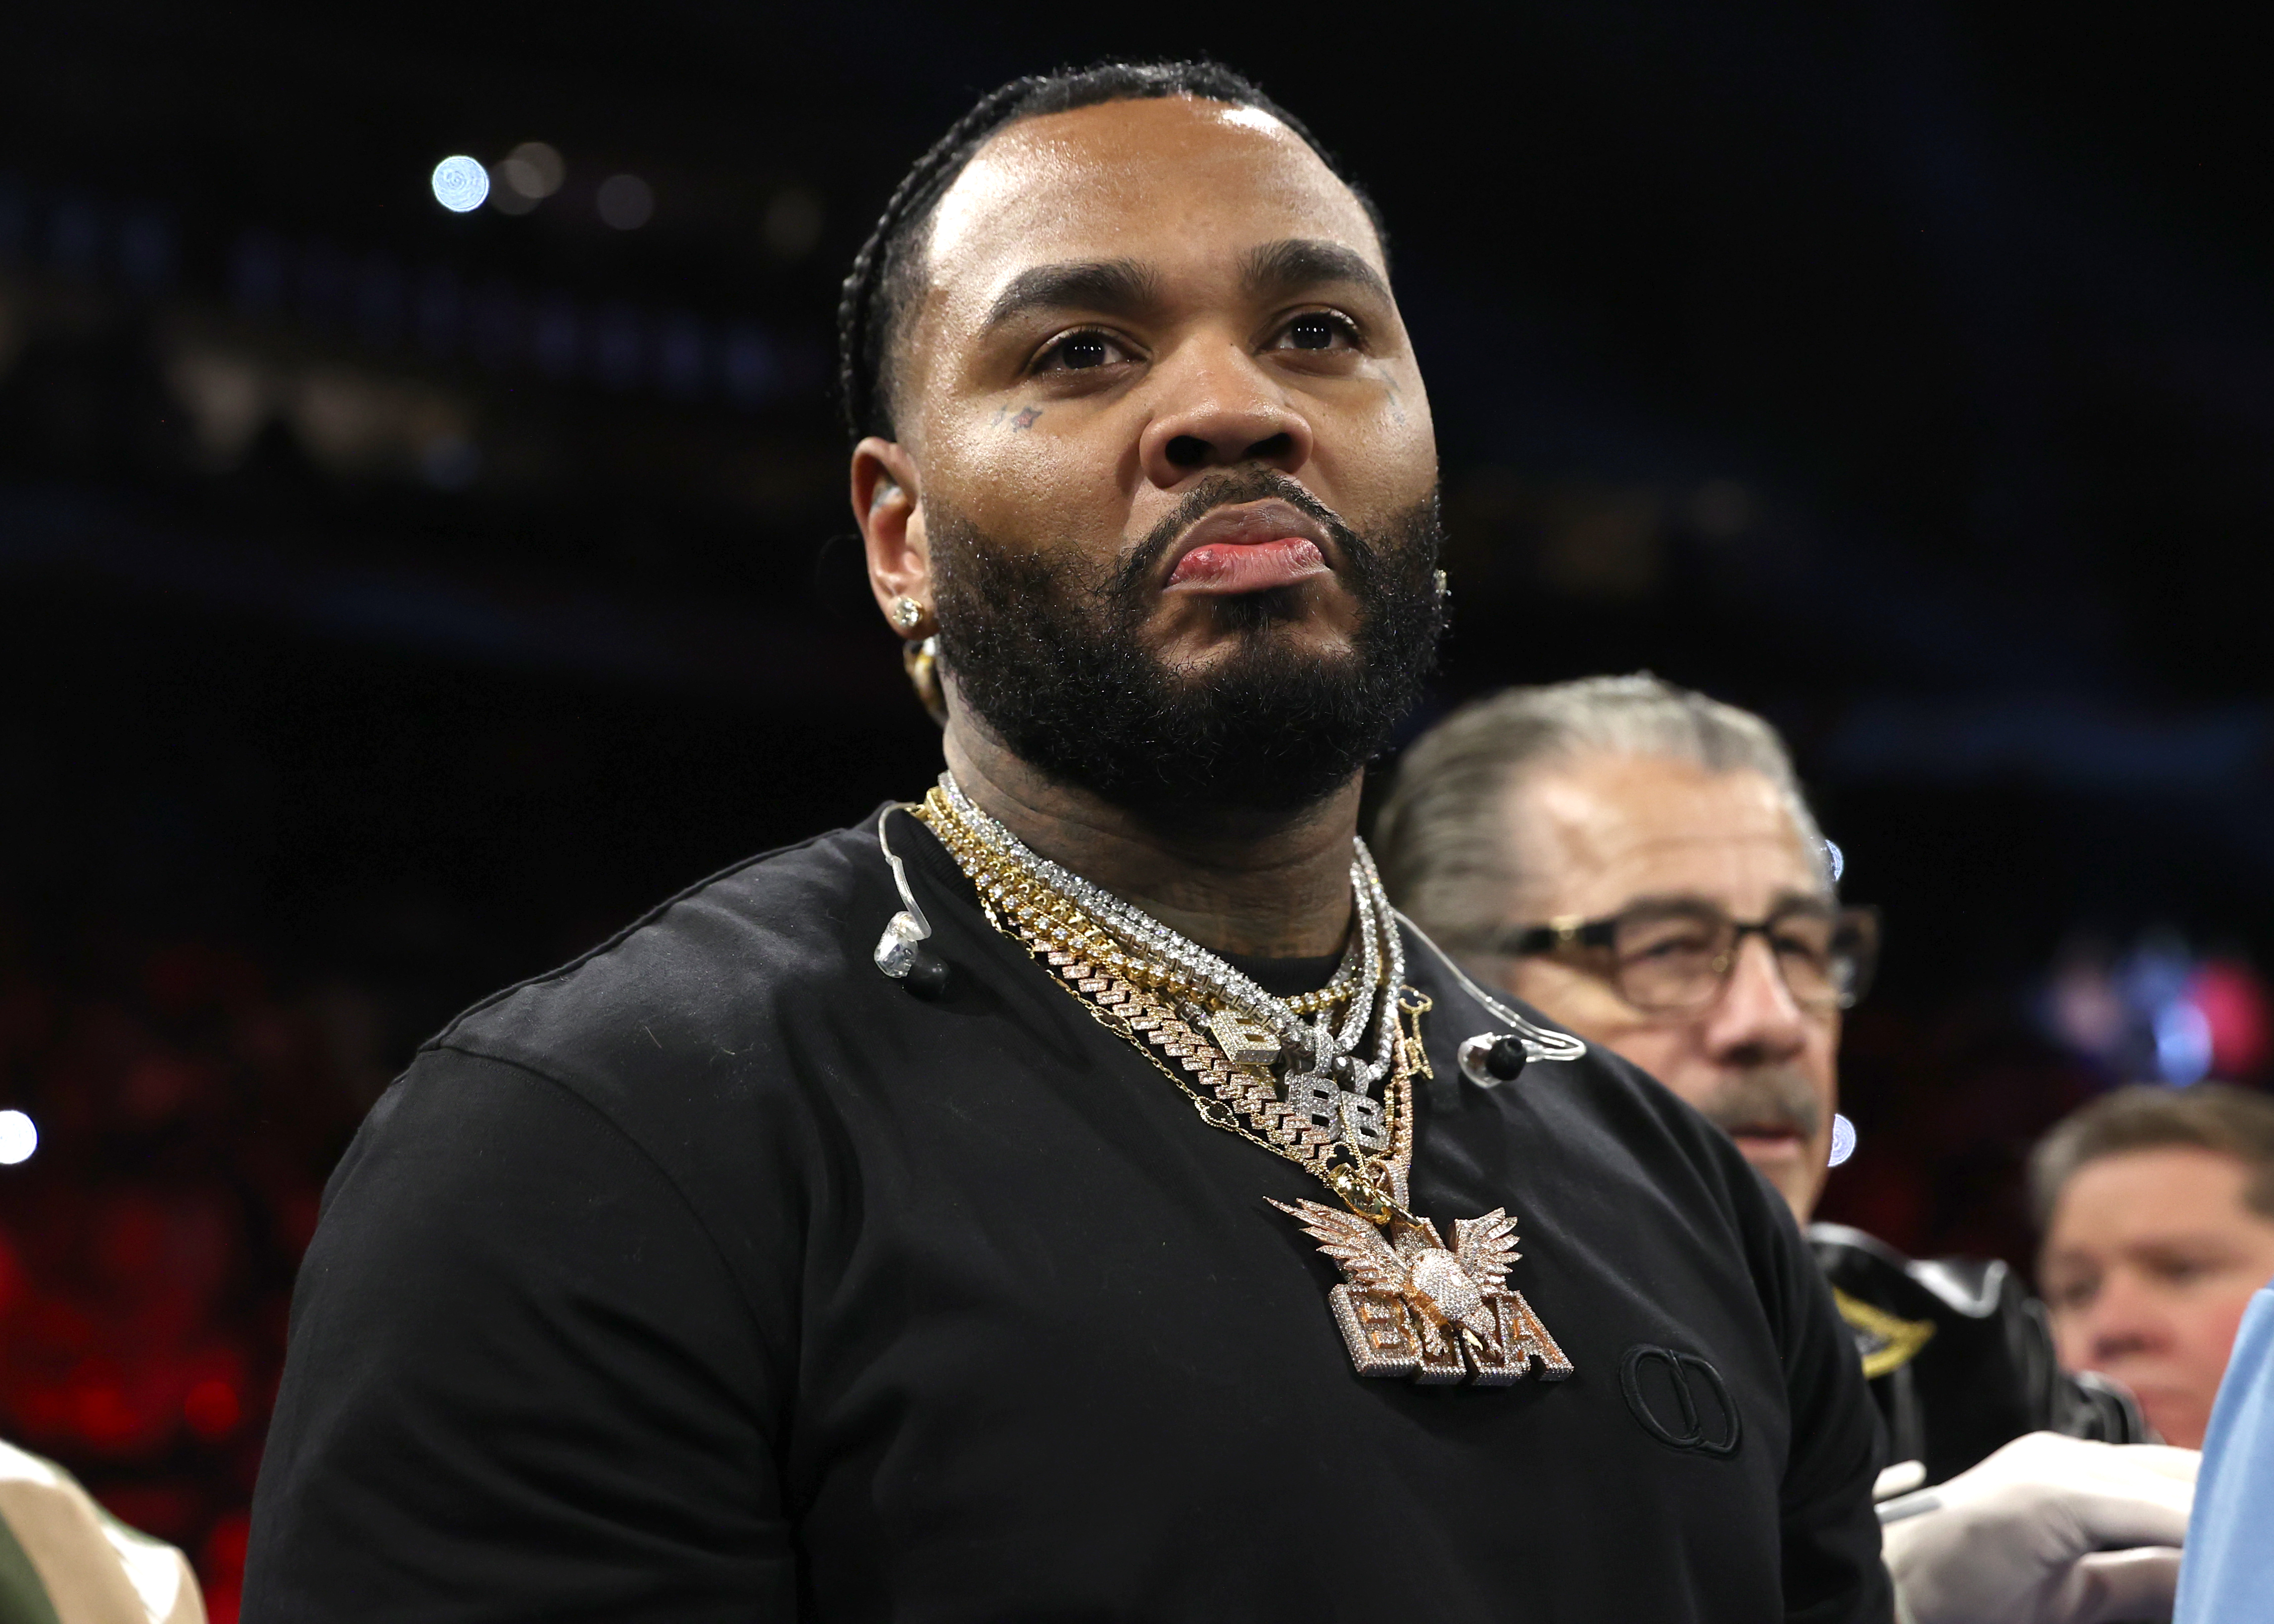 Kevin Gates at the Shakur Stevenson vs Robson Conceição fight night during the WBC and WBO junior lightweight championship on September 23, 2023, in Newark, New Jersey. | Source: Getty Images